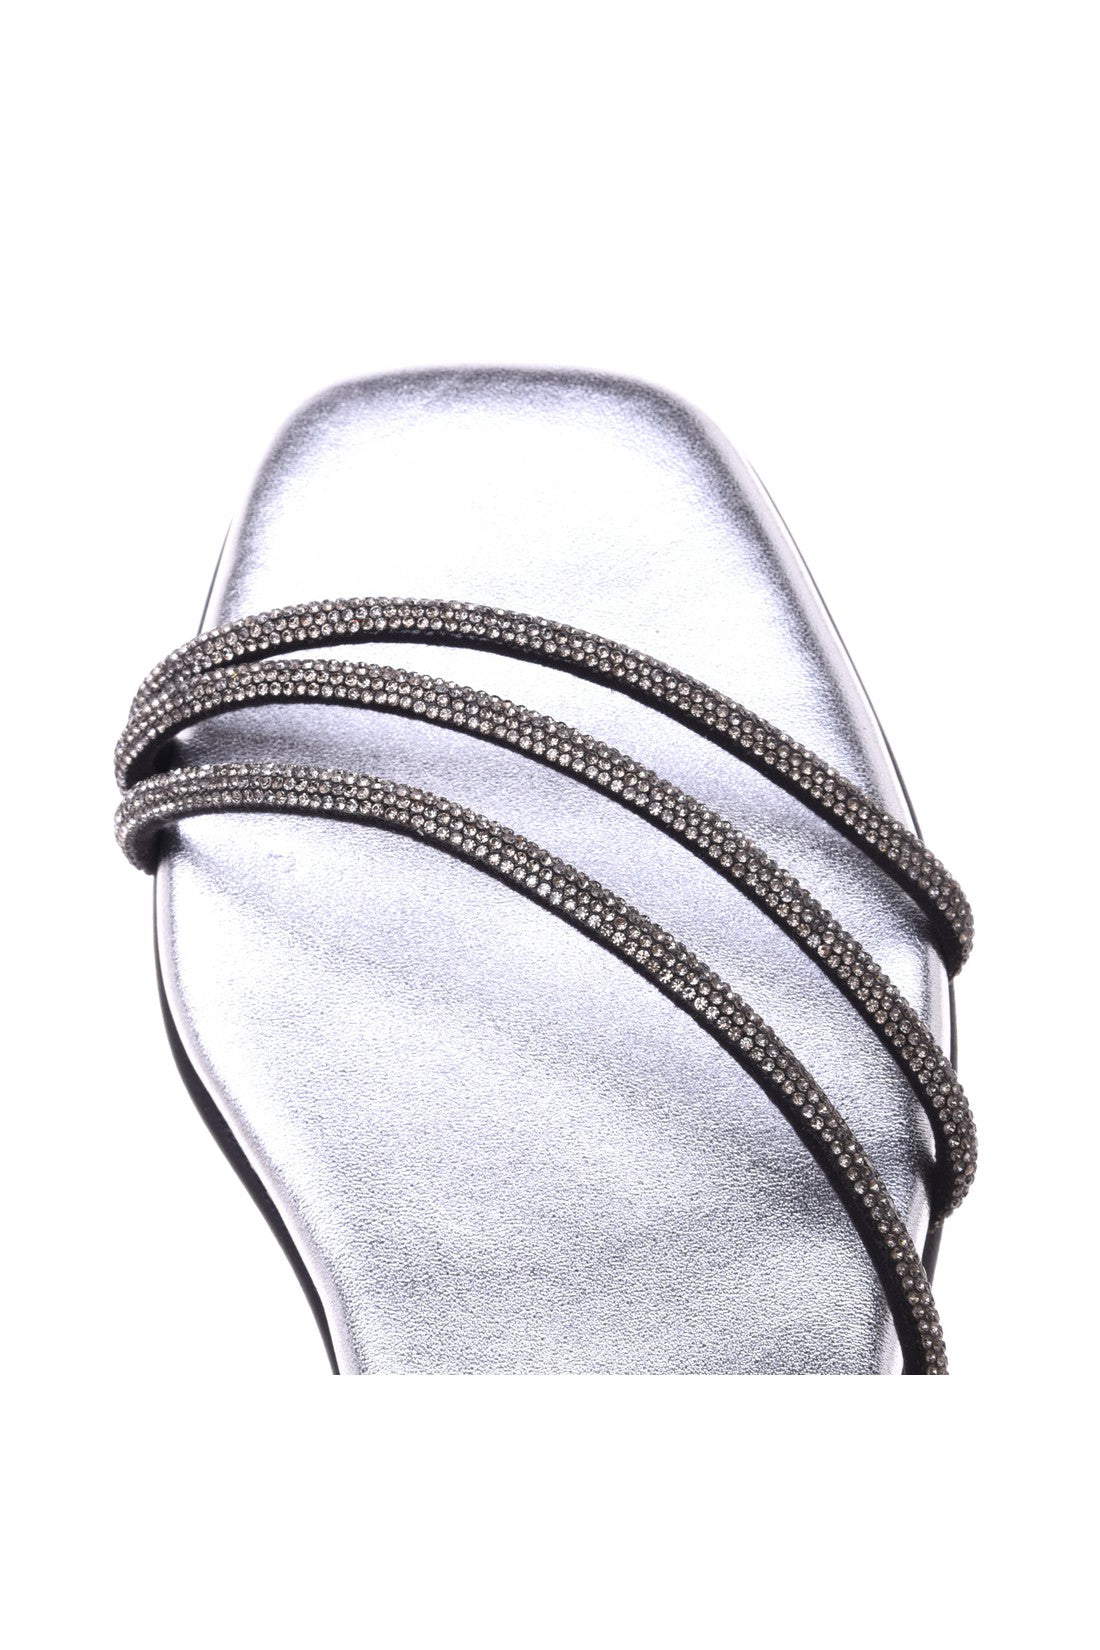 BALDININI-OUTLET-SALE-Sandal-in-silver-laminated-nappa-leather-Sandalen-ARCHIVE-COLLECTION-4.jpg